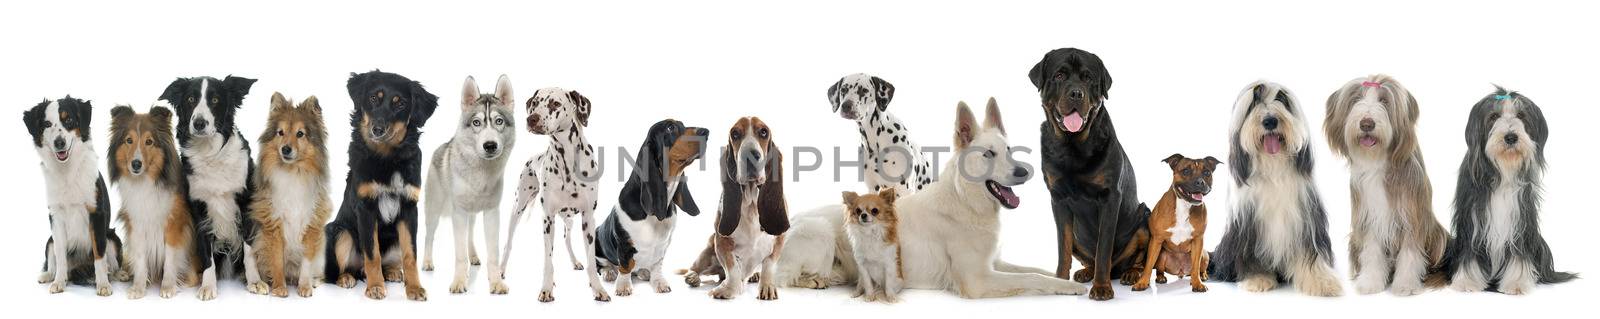 group of dogs by cynoclub